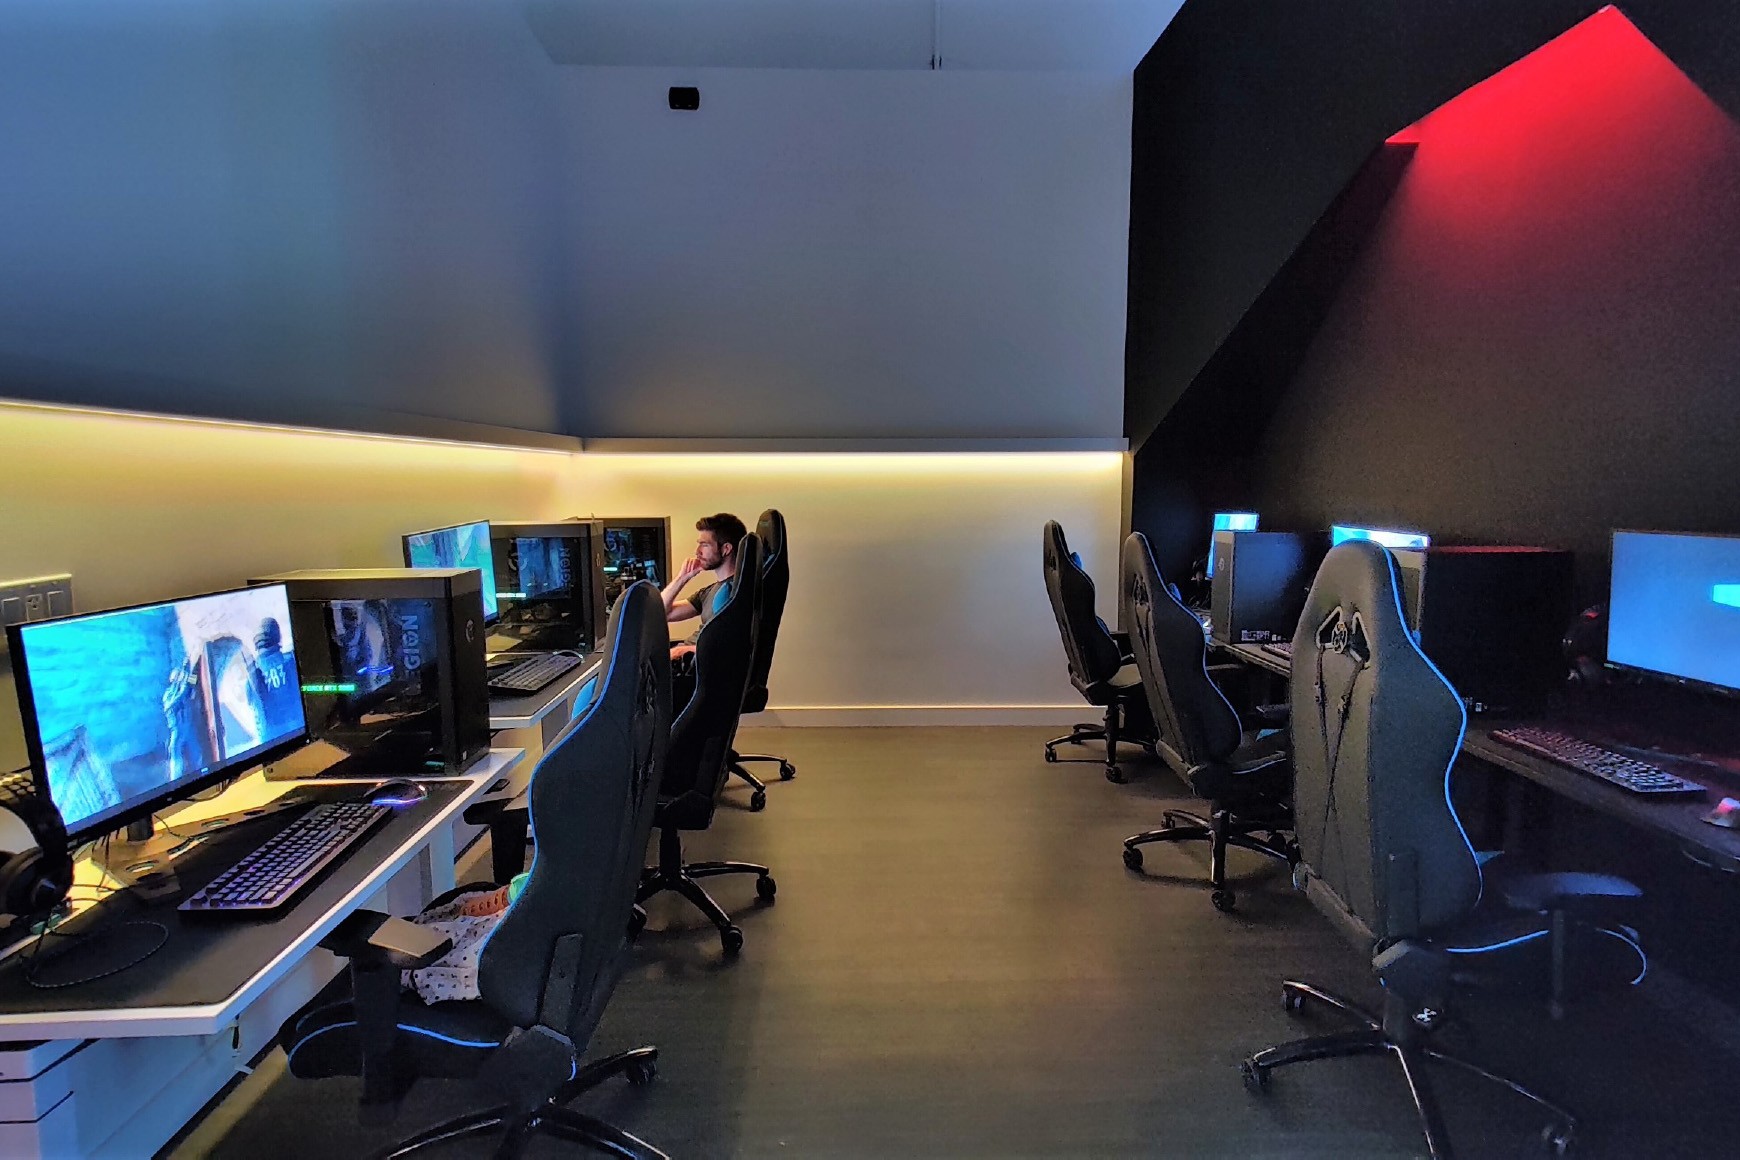 A view of the Wallach Esports Lounge with the two rows of gaming computers up against opposite walls, with ambient lighting throughout.